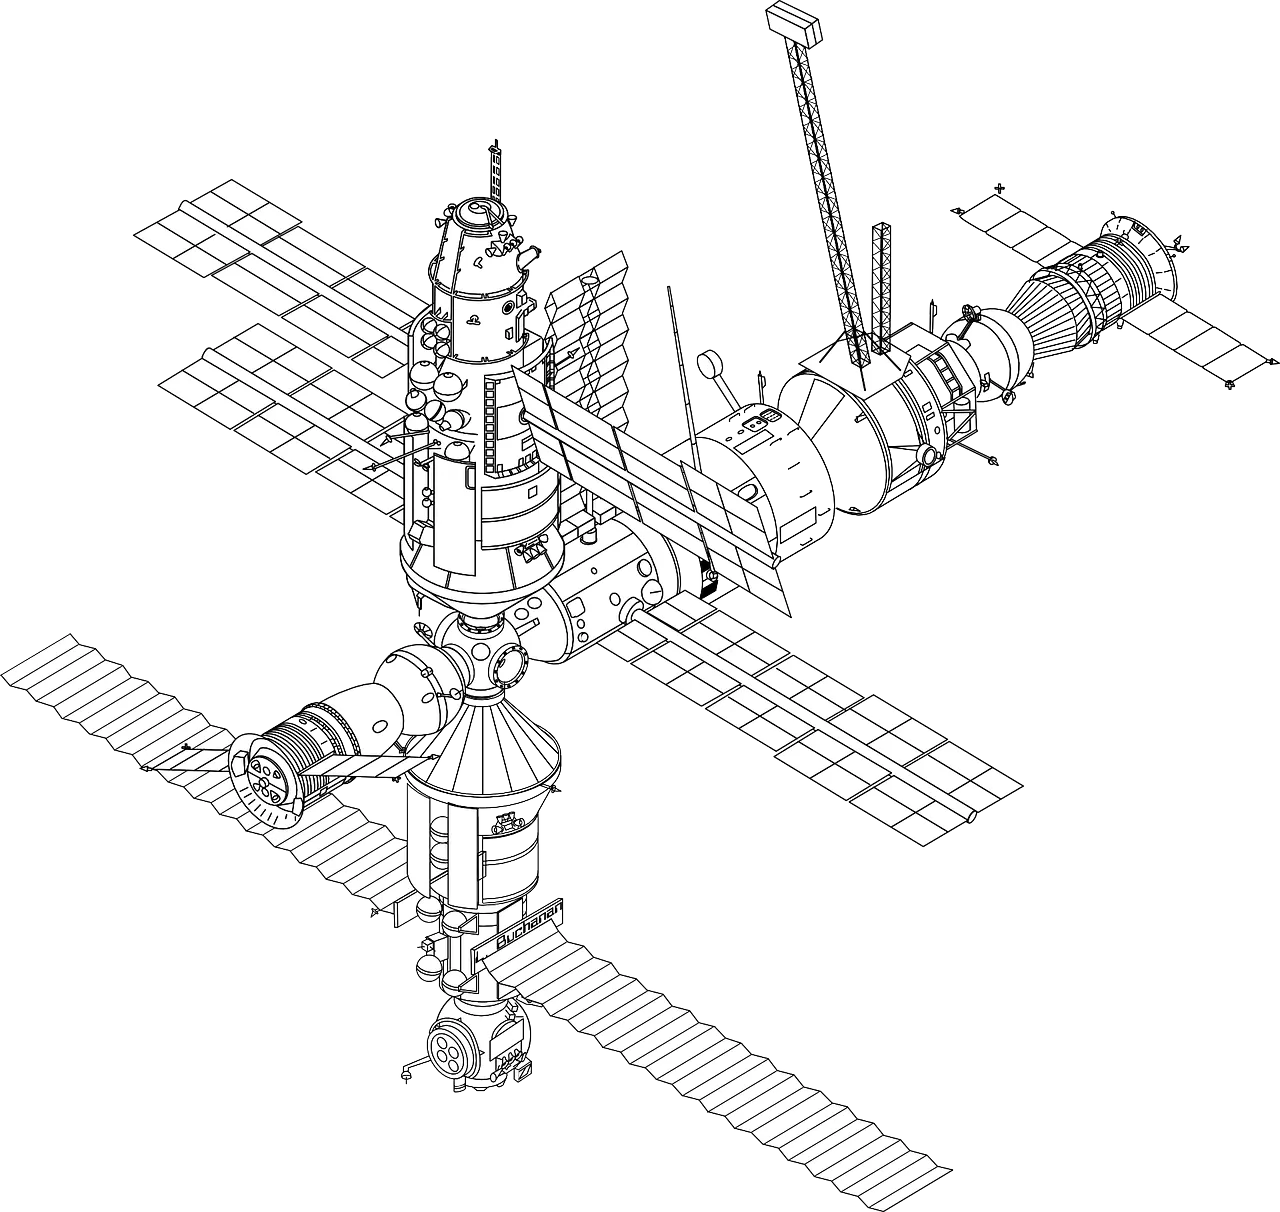 space-station-161807_1280.png